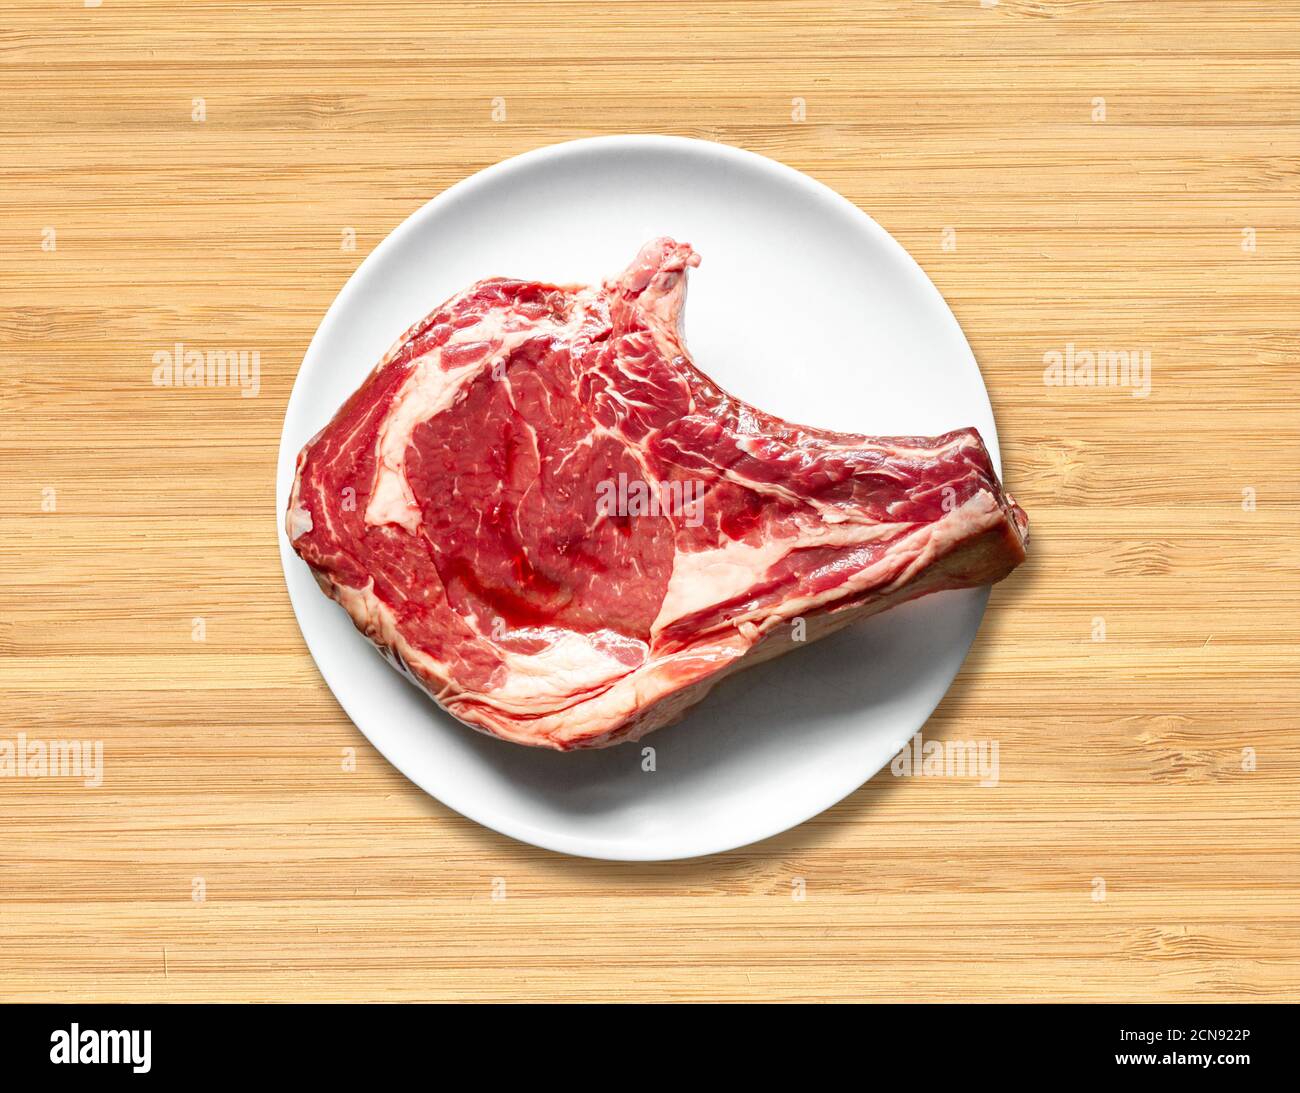 Beef prime rib on a plate Stock Photo